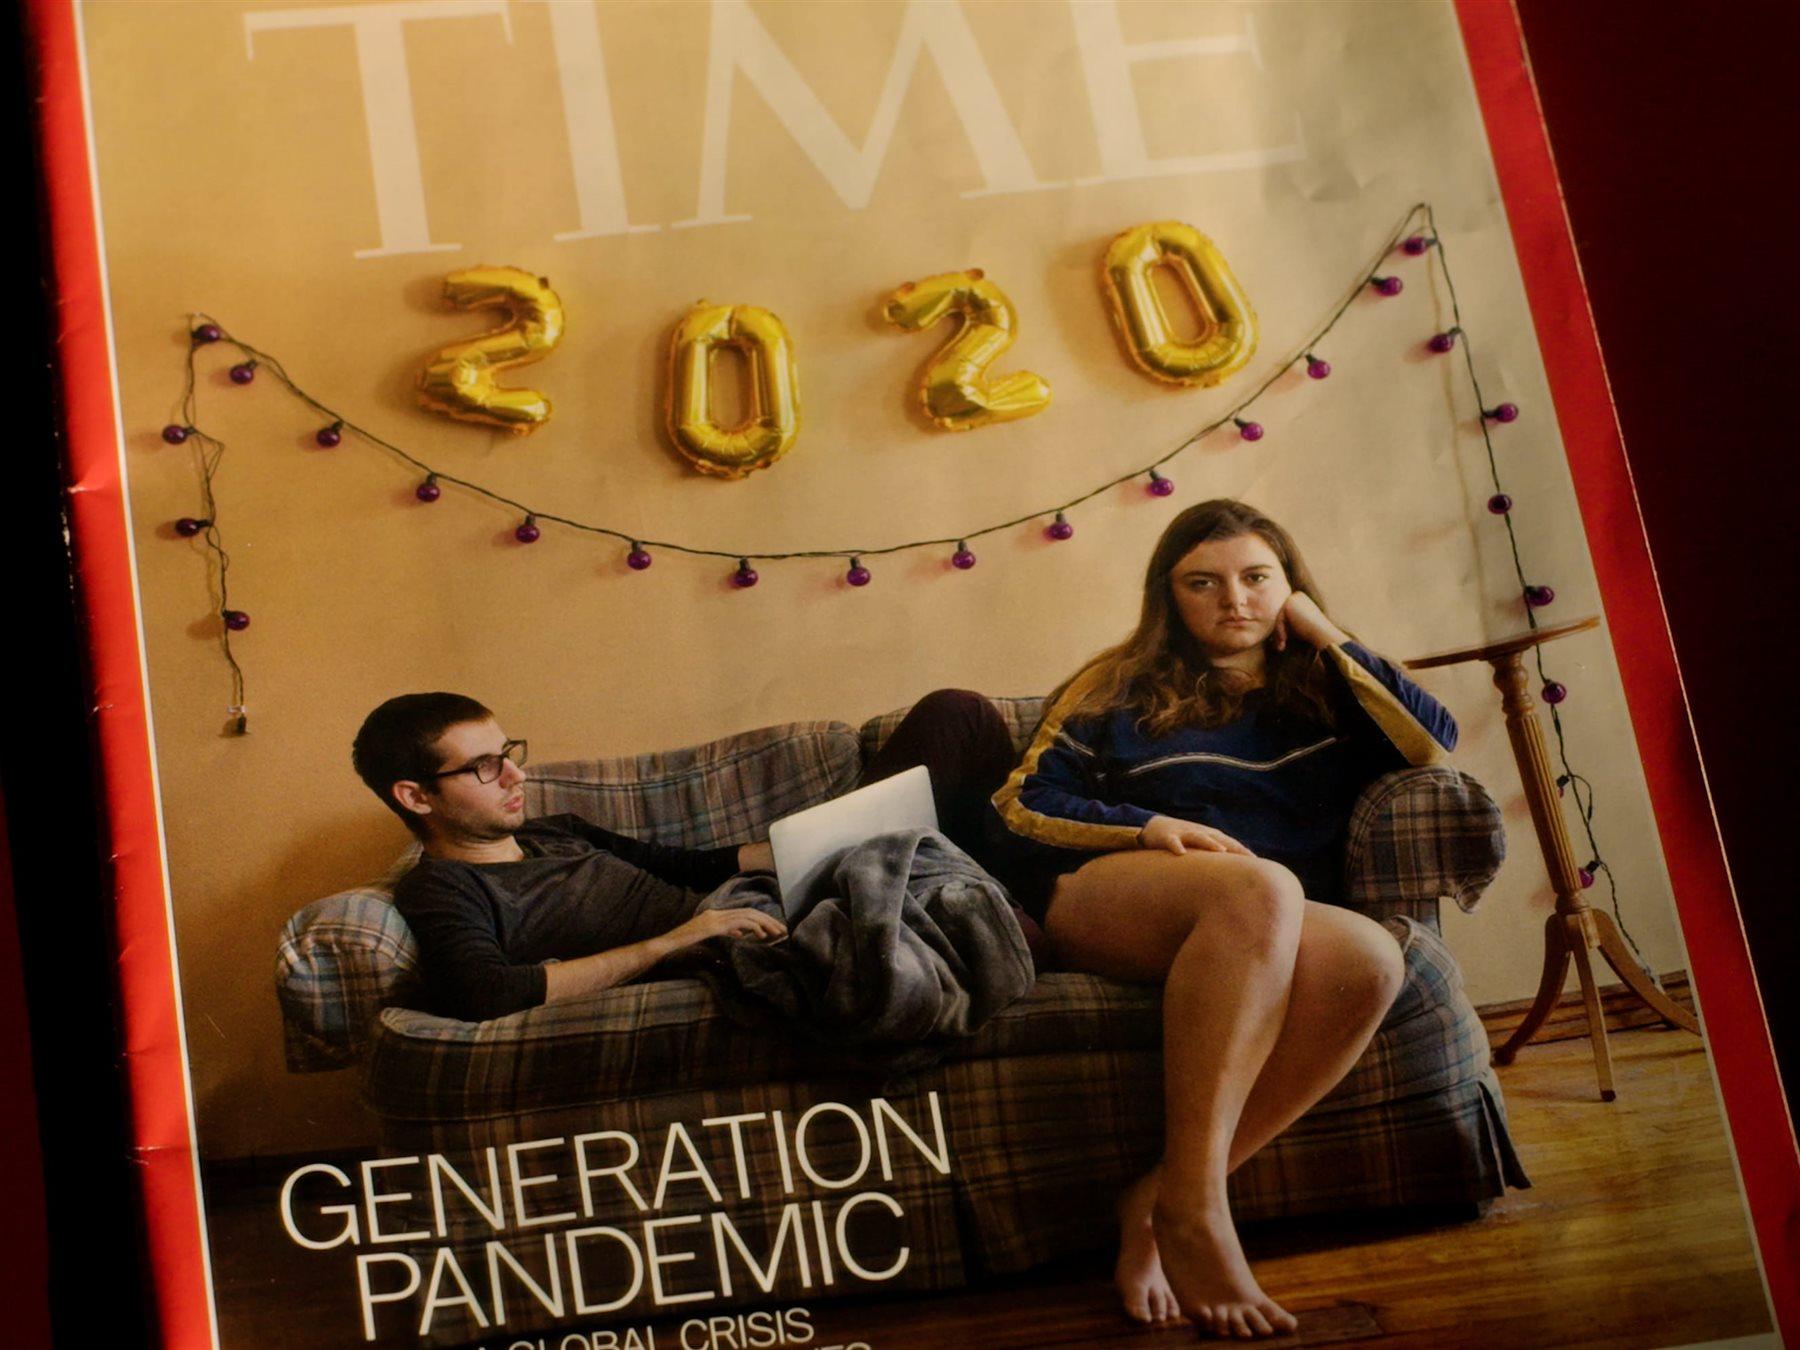 Two students sit on a couch under a 2020 banner on a &quot;TIME&quot; magazine cover